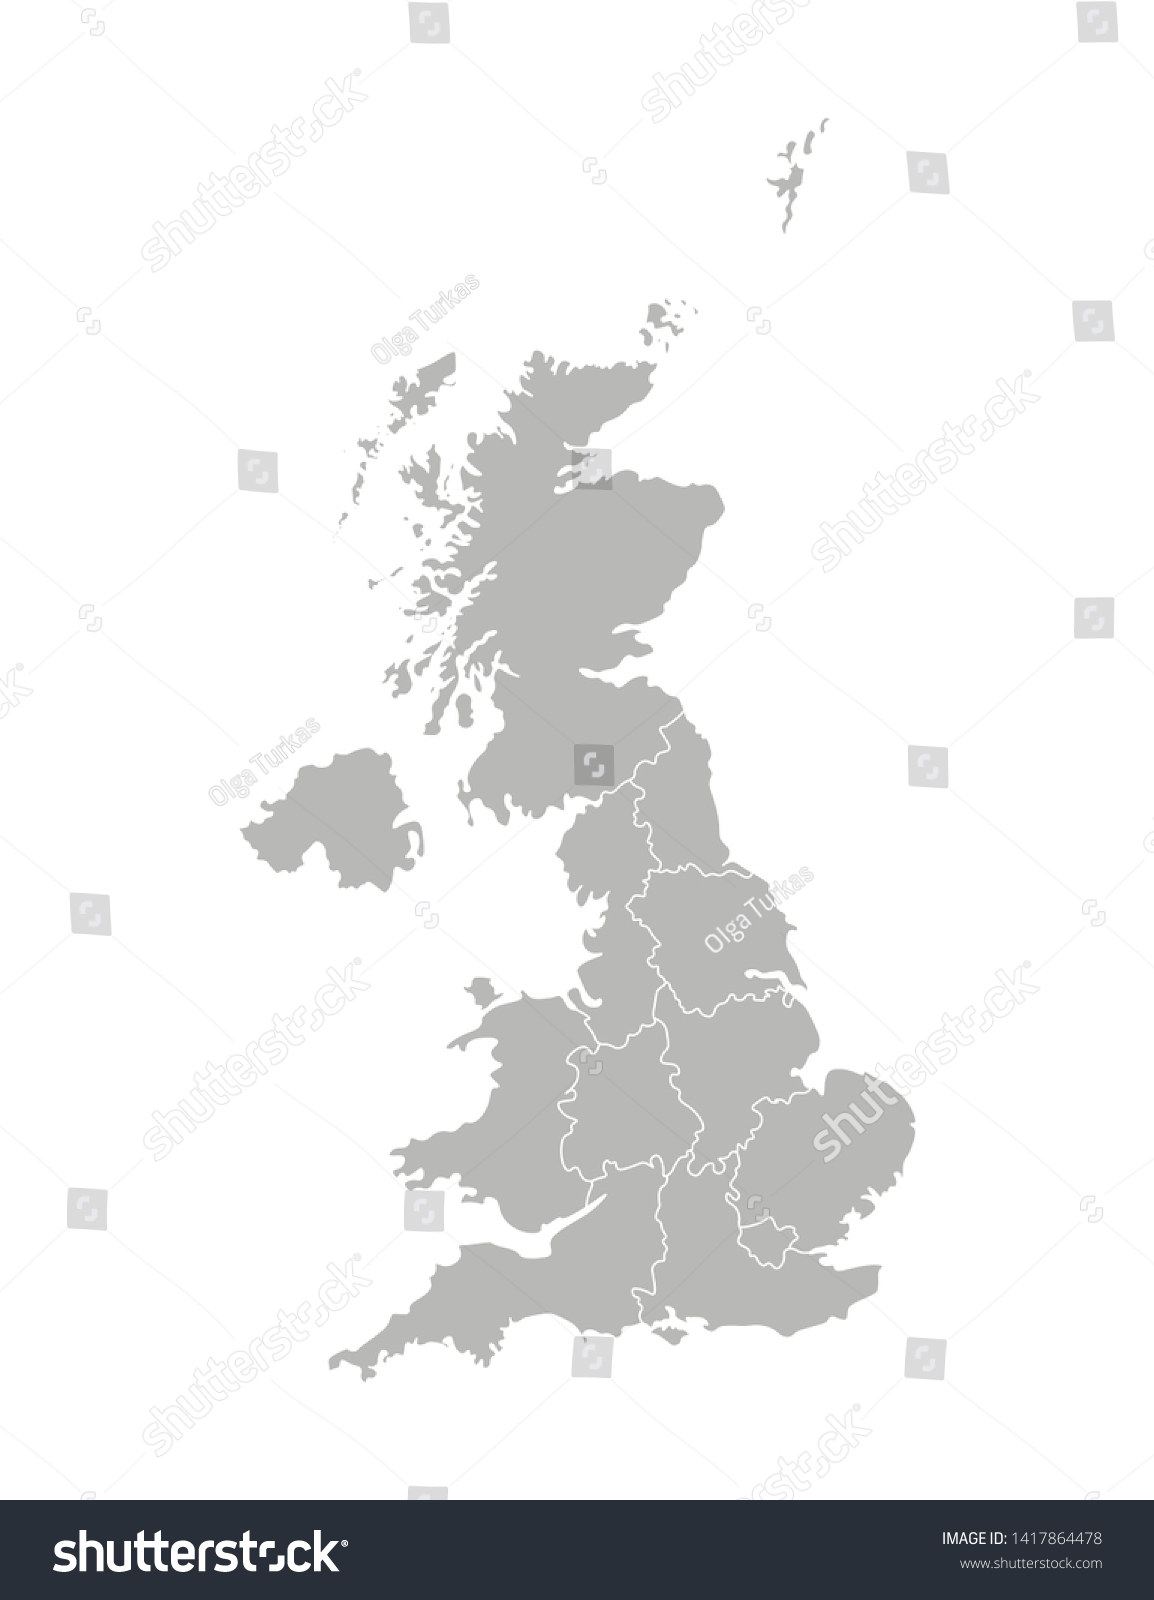 SVG of Vector isolated illustration of simplified administrative map of the United Kingdom of Great Britain and Northern Ireland. Borders of the provinces regions. Grey silhouettes. White outline svg